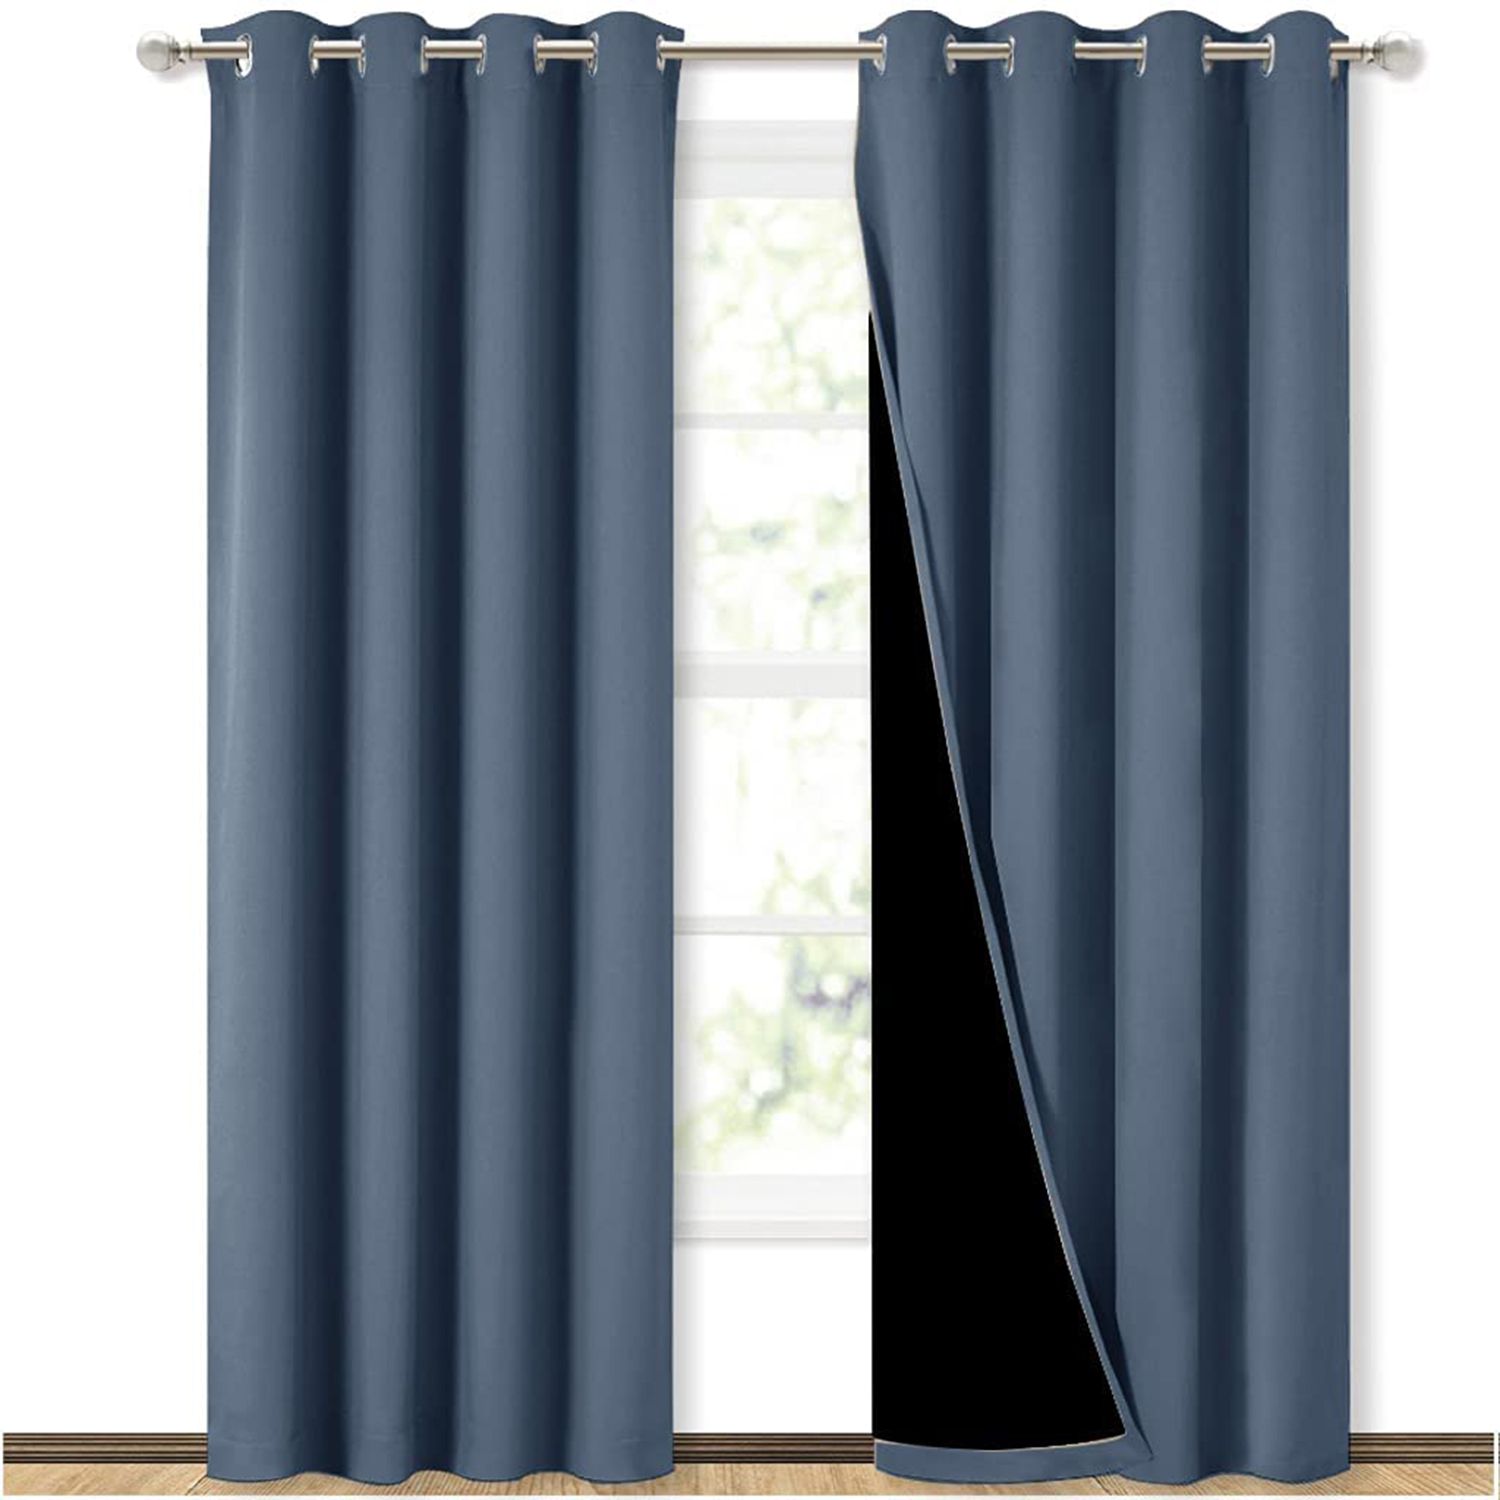 White BONZER 100% Blackout Curtains for Bedroom 2 Panels Sun Light Blocking Grommet Window Drapes for Living Room Premium Thick Velvet Curtains 84 Inches Long Thermal Insulated Energy Saving